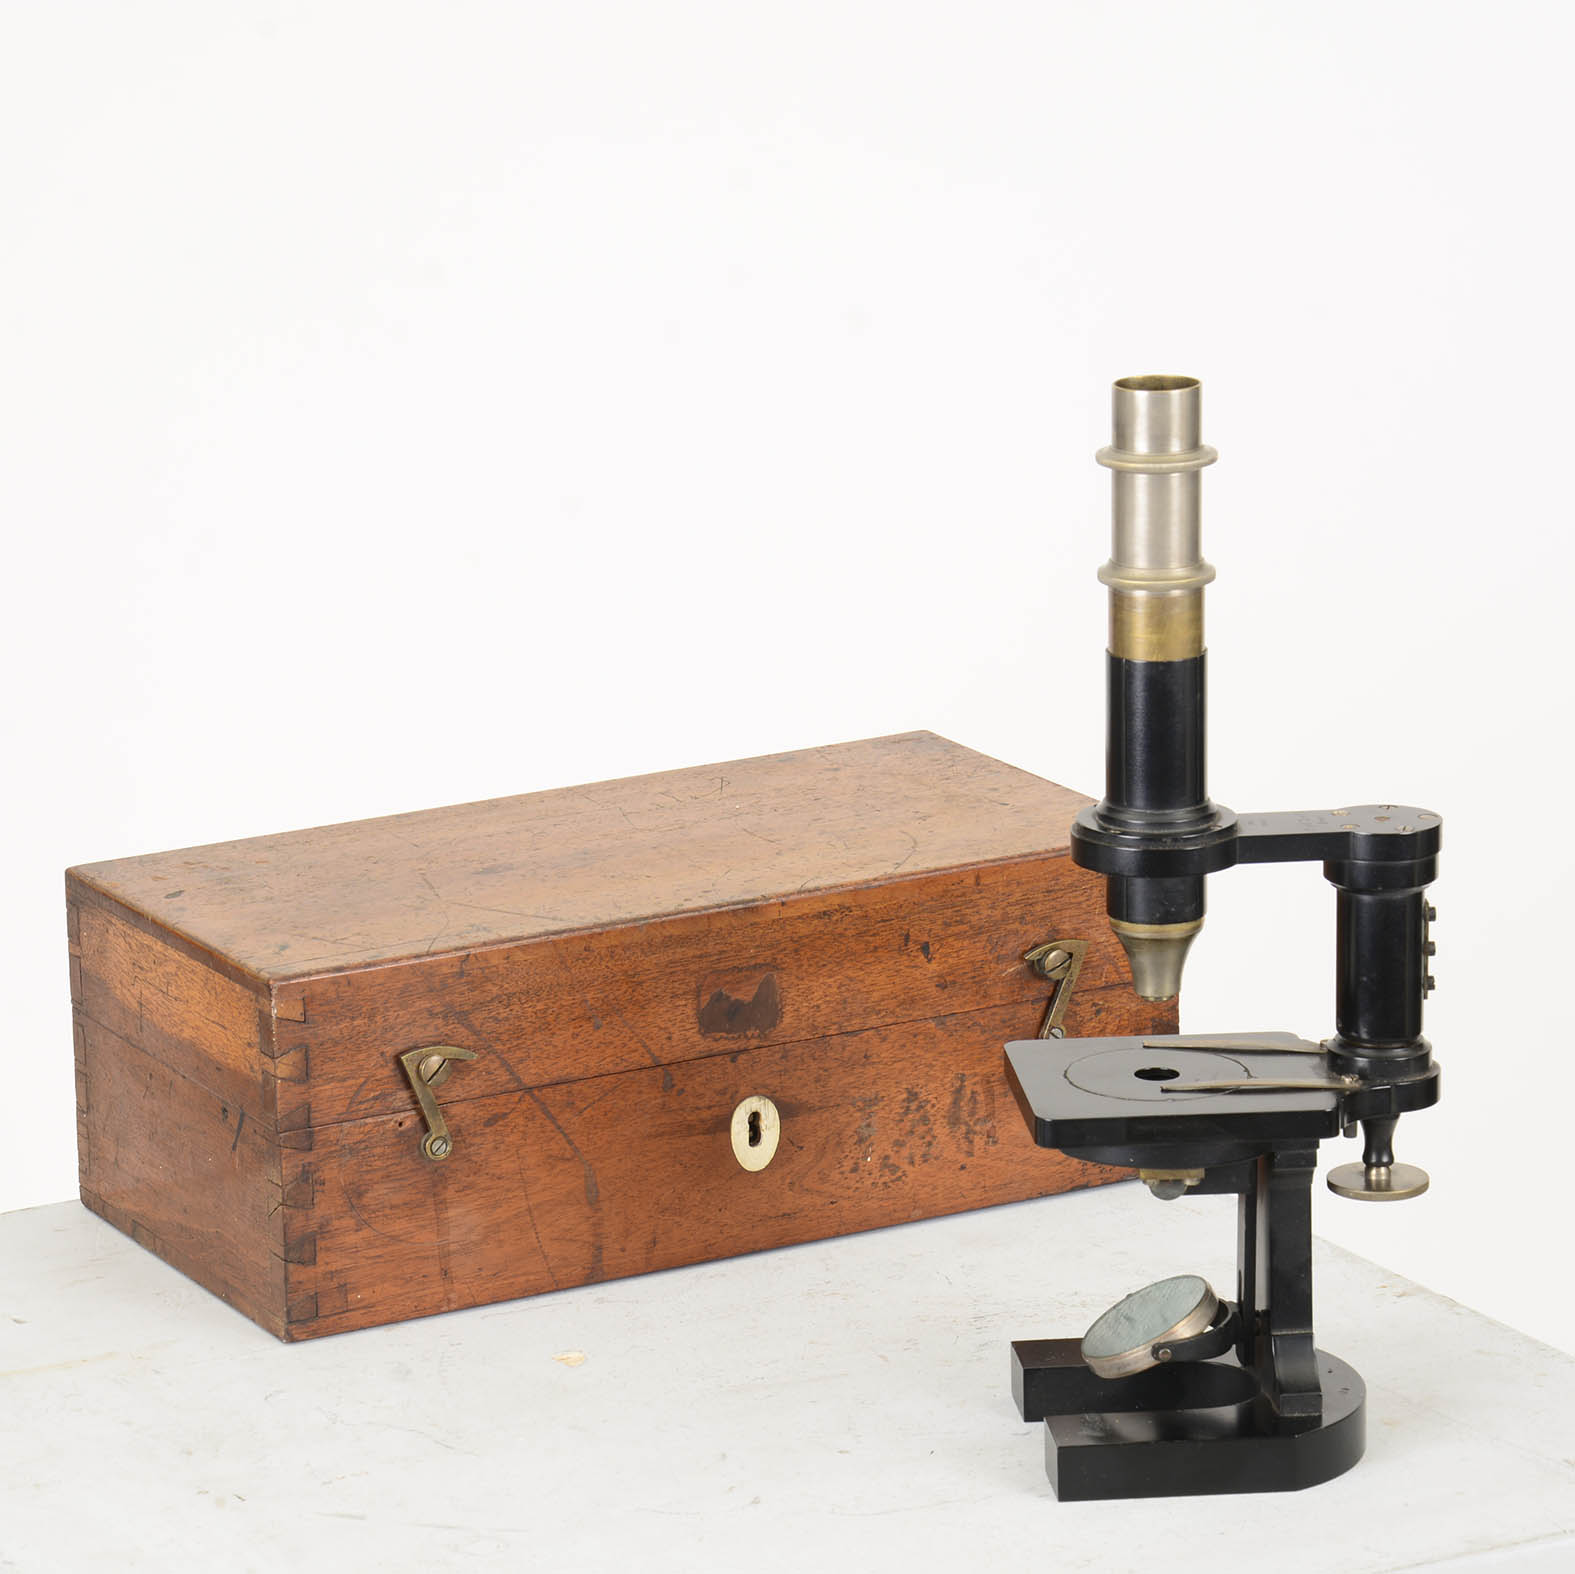 Rare & early Carl Zeiss Jena Microscope, Stativ Ib from 1871